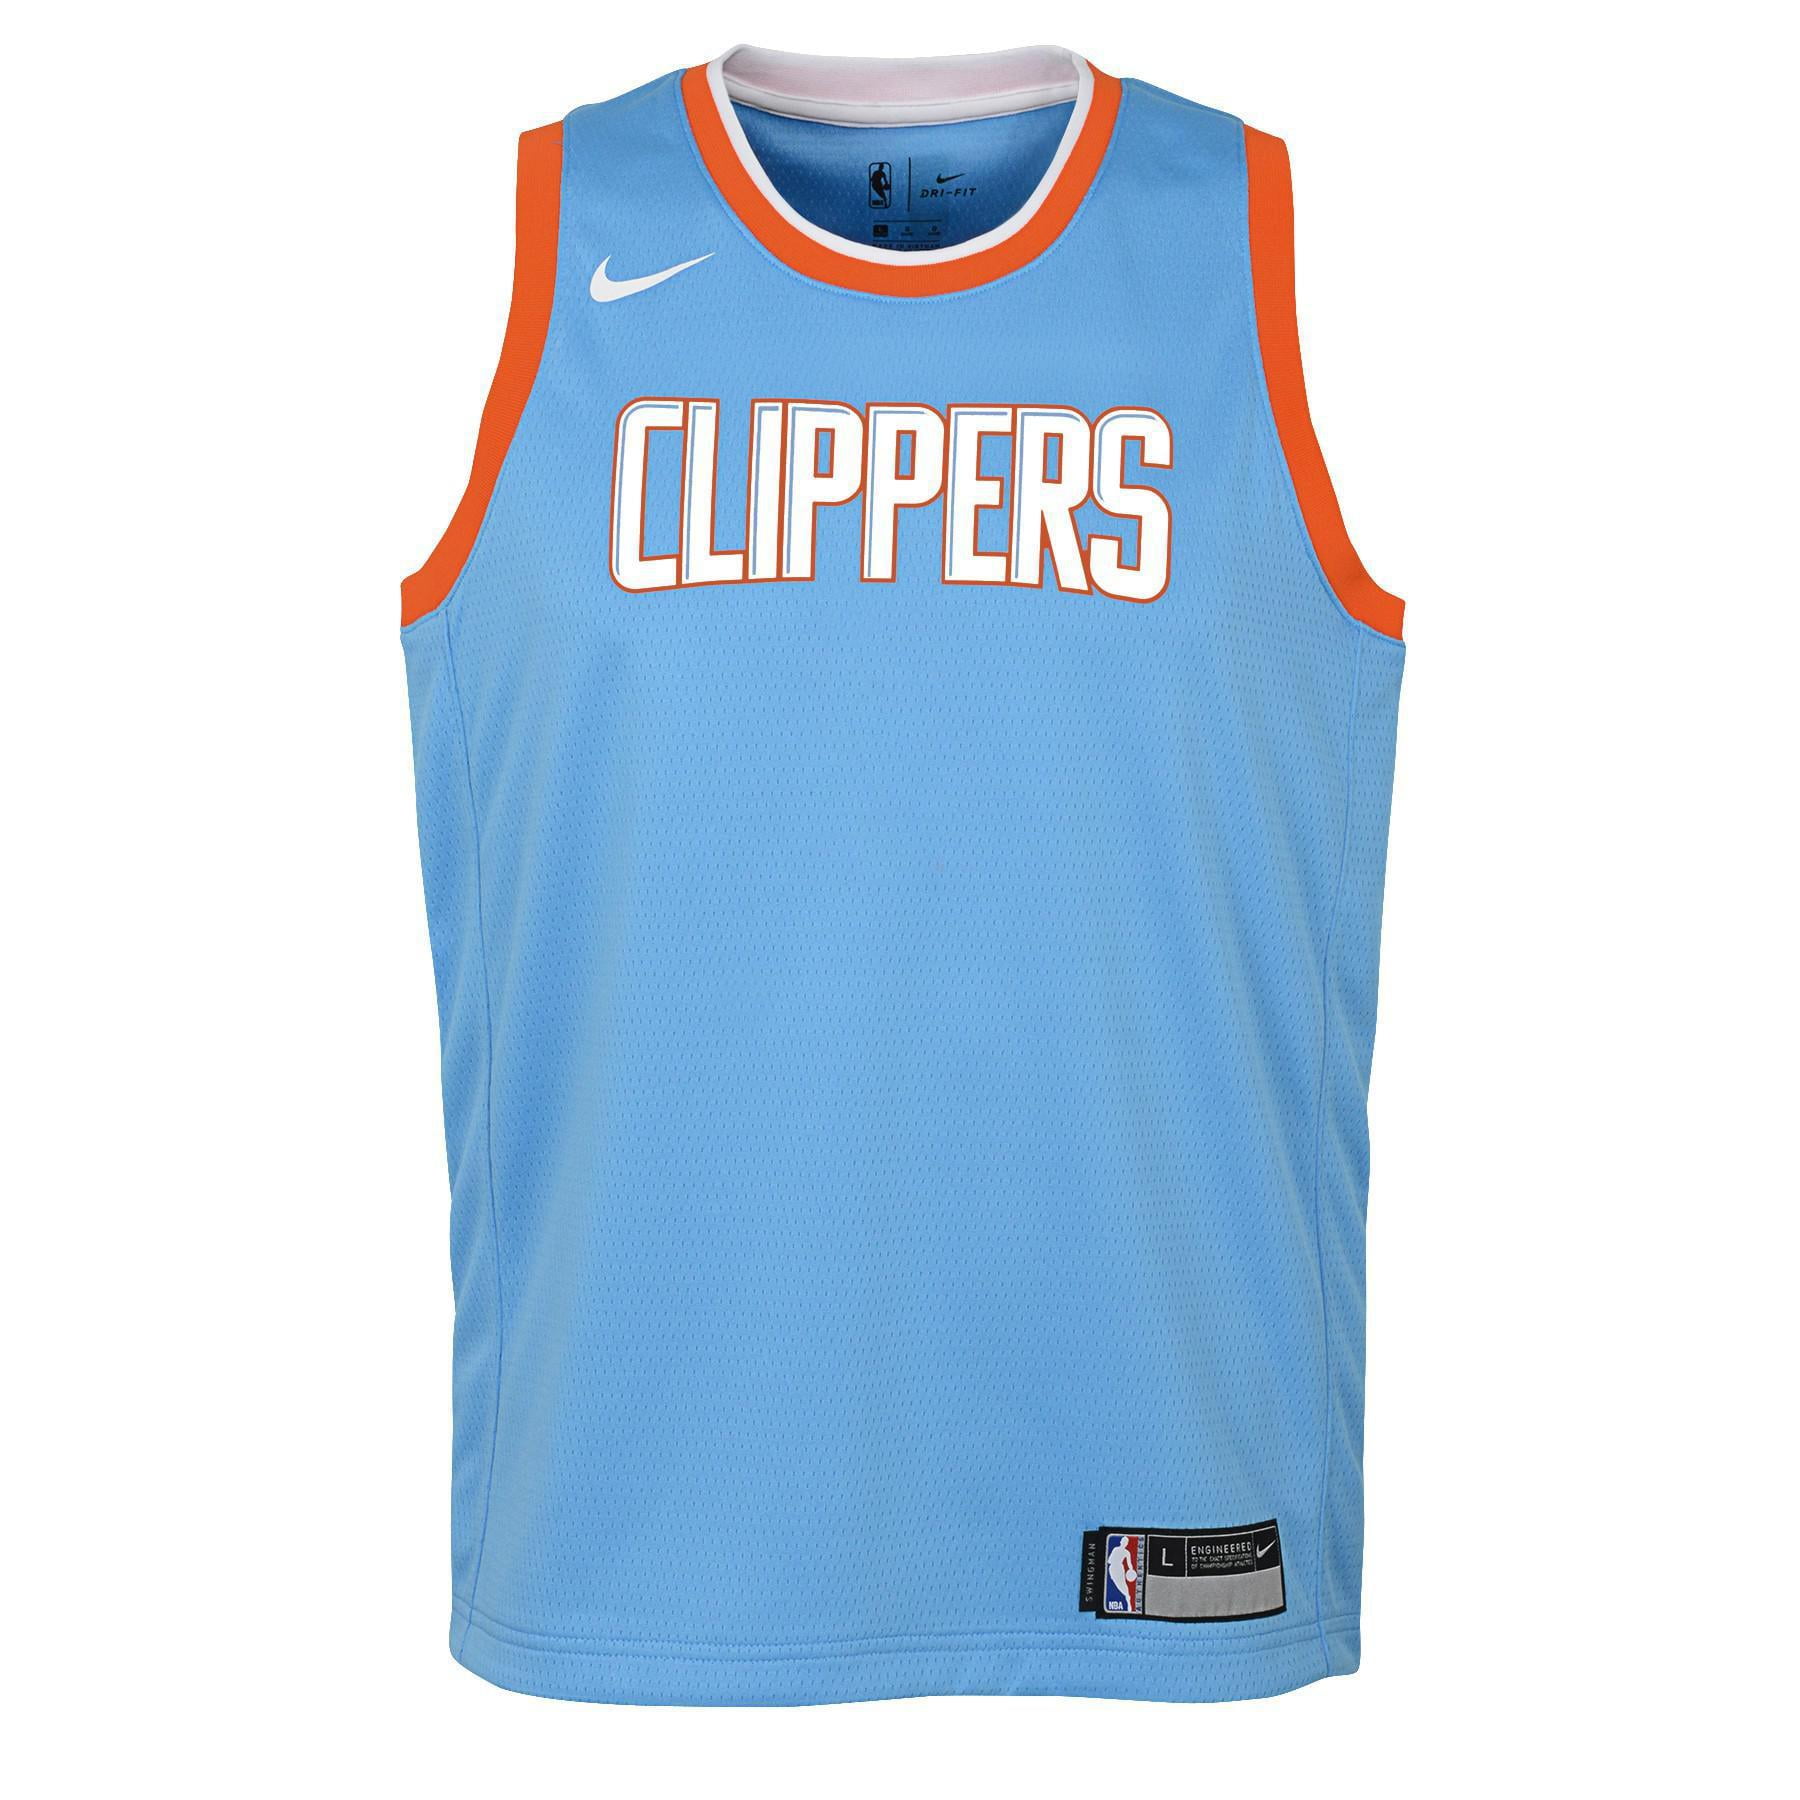 Nike NBA Youth (8-20) Los Angeles Clippers City Edition Swingman